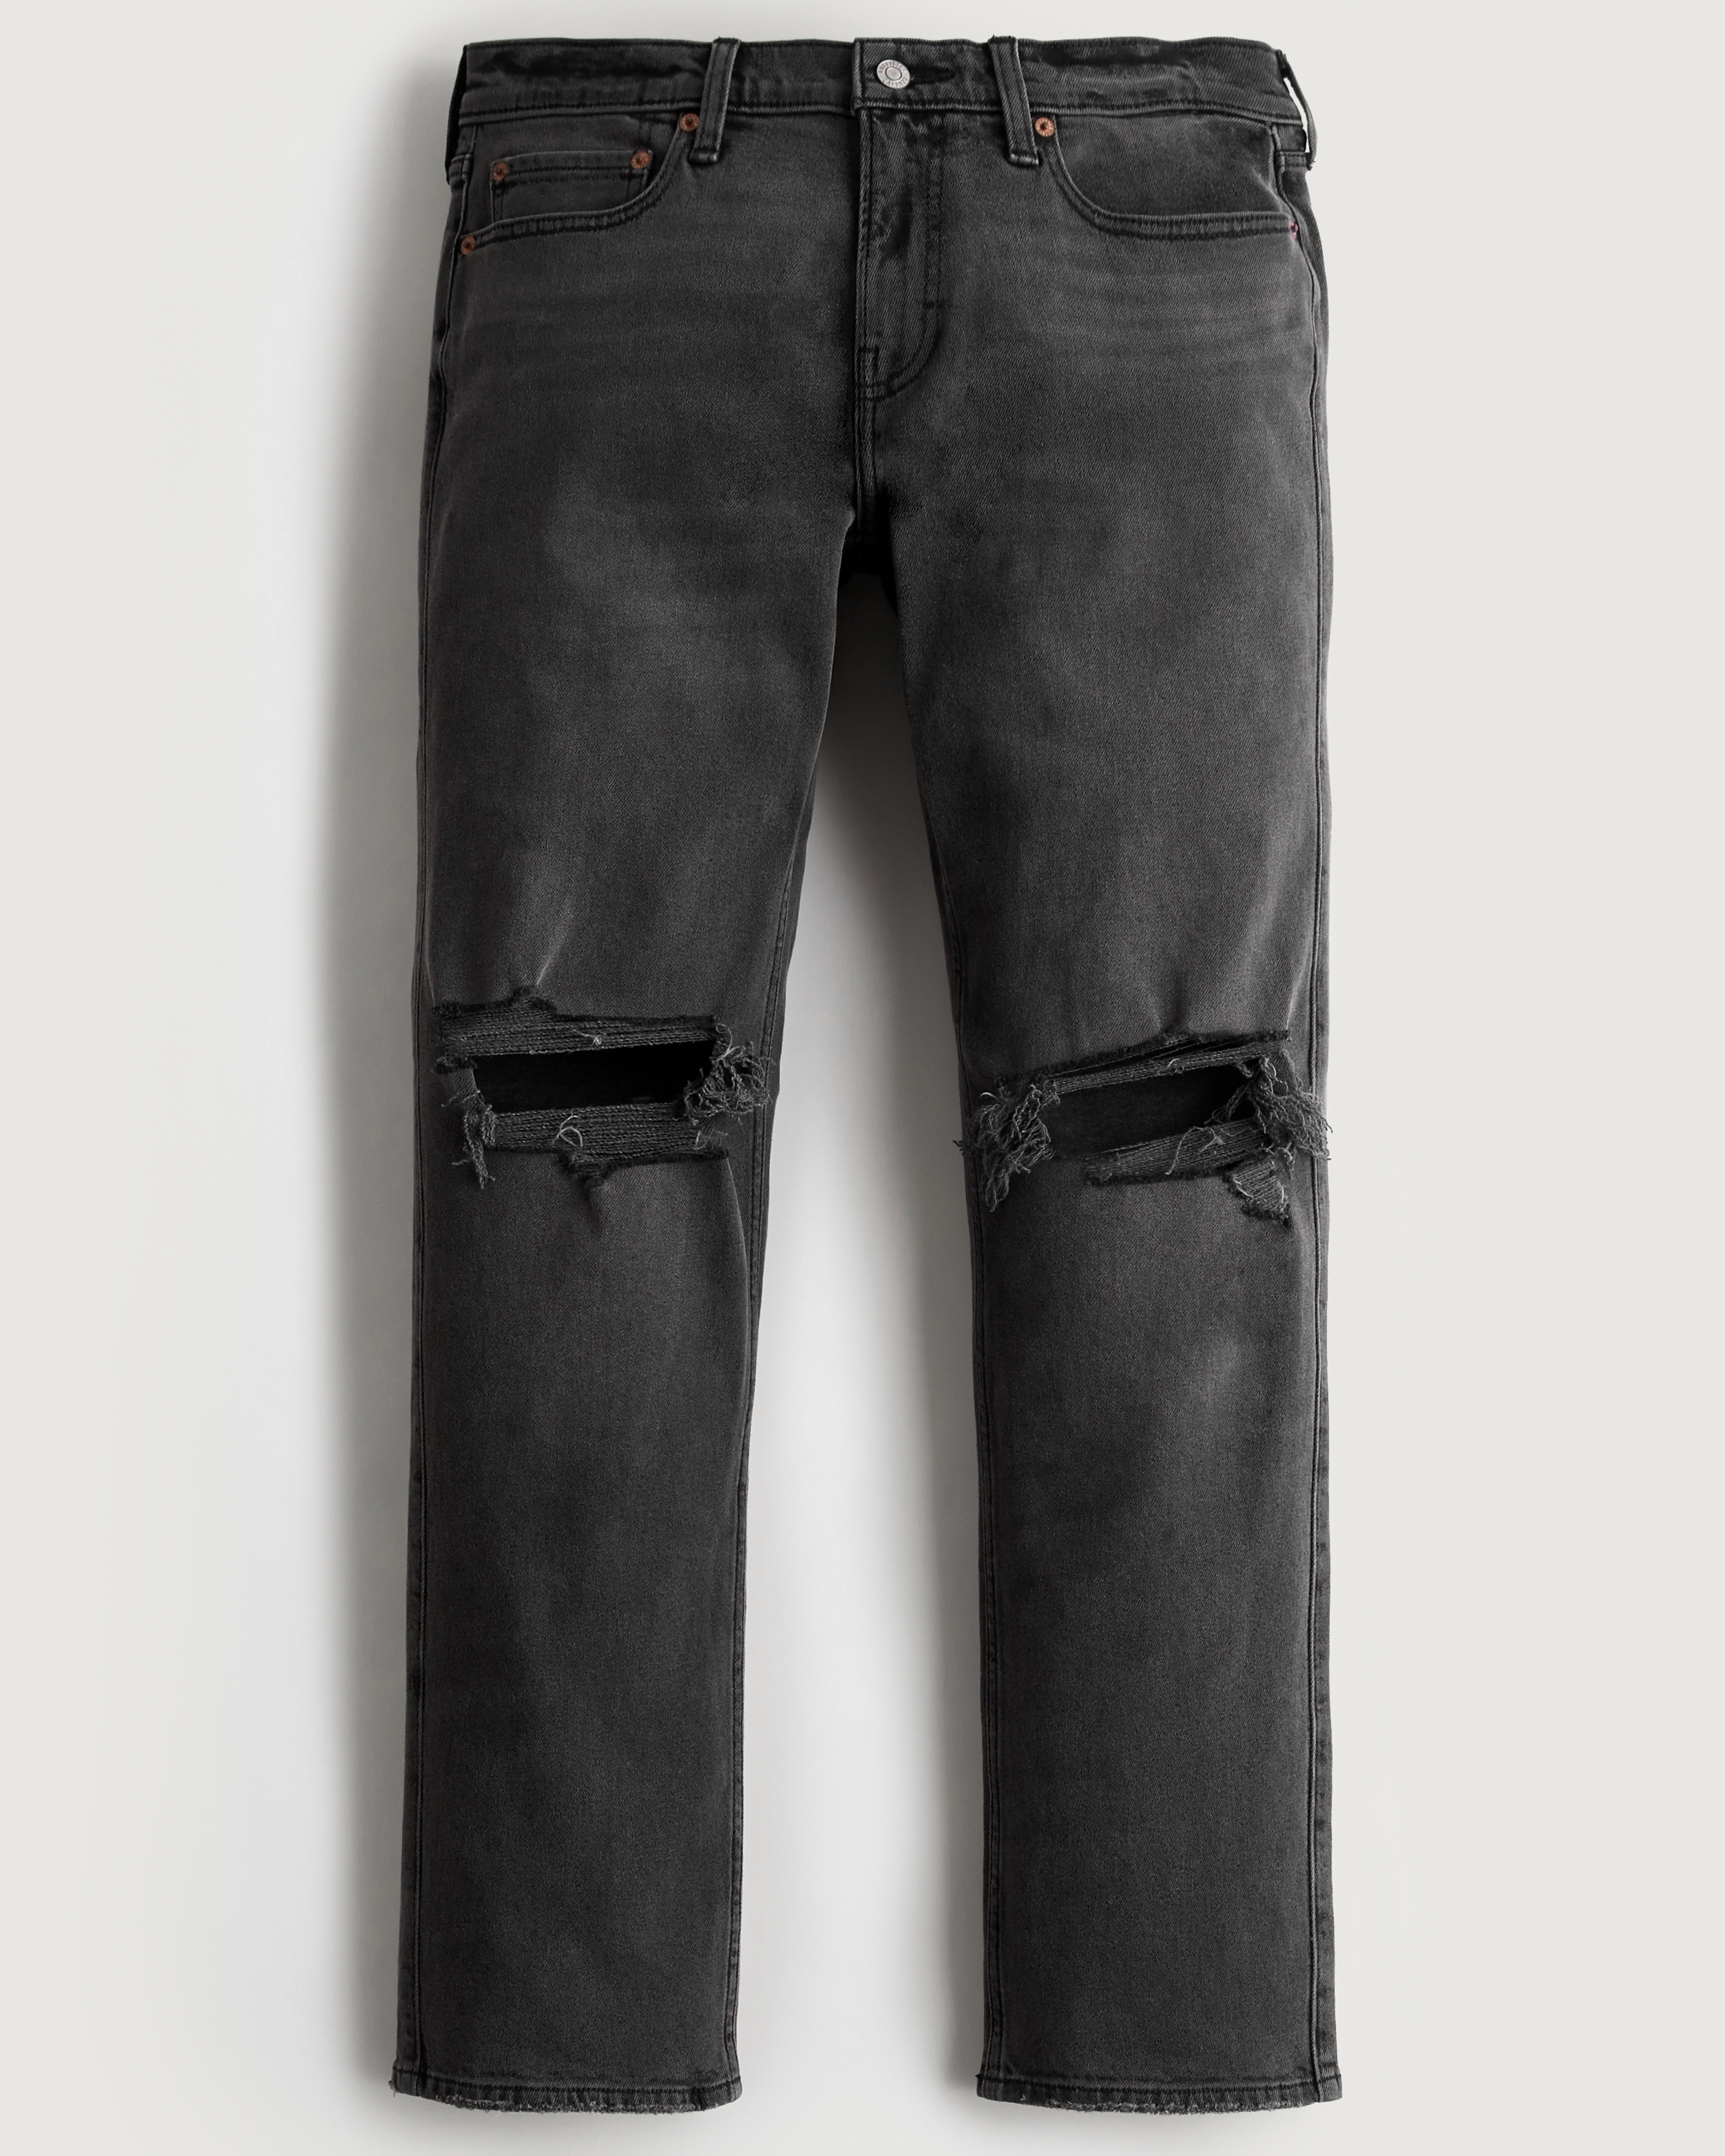 Ripped Black Vintage Straight Jeans